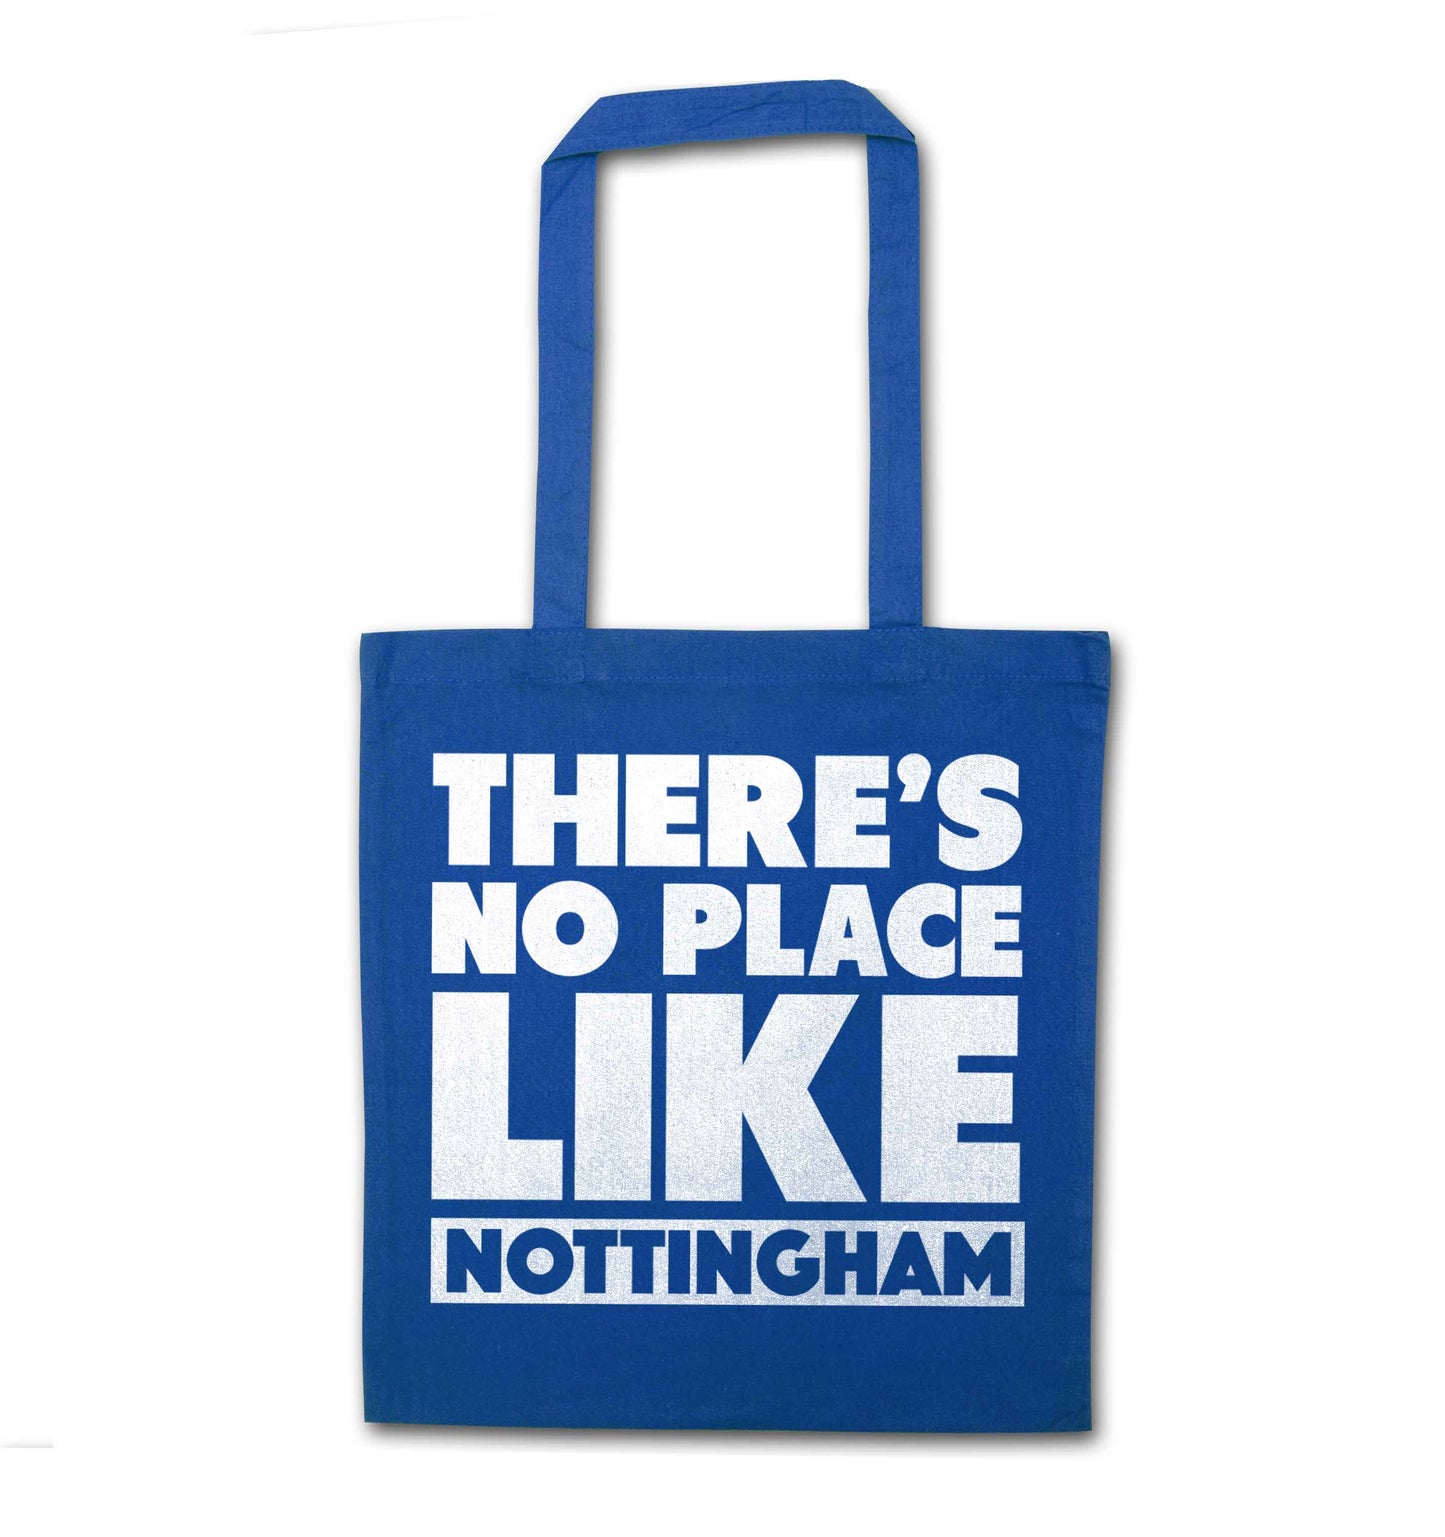 There's no place like Nottingham blue tote bag